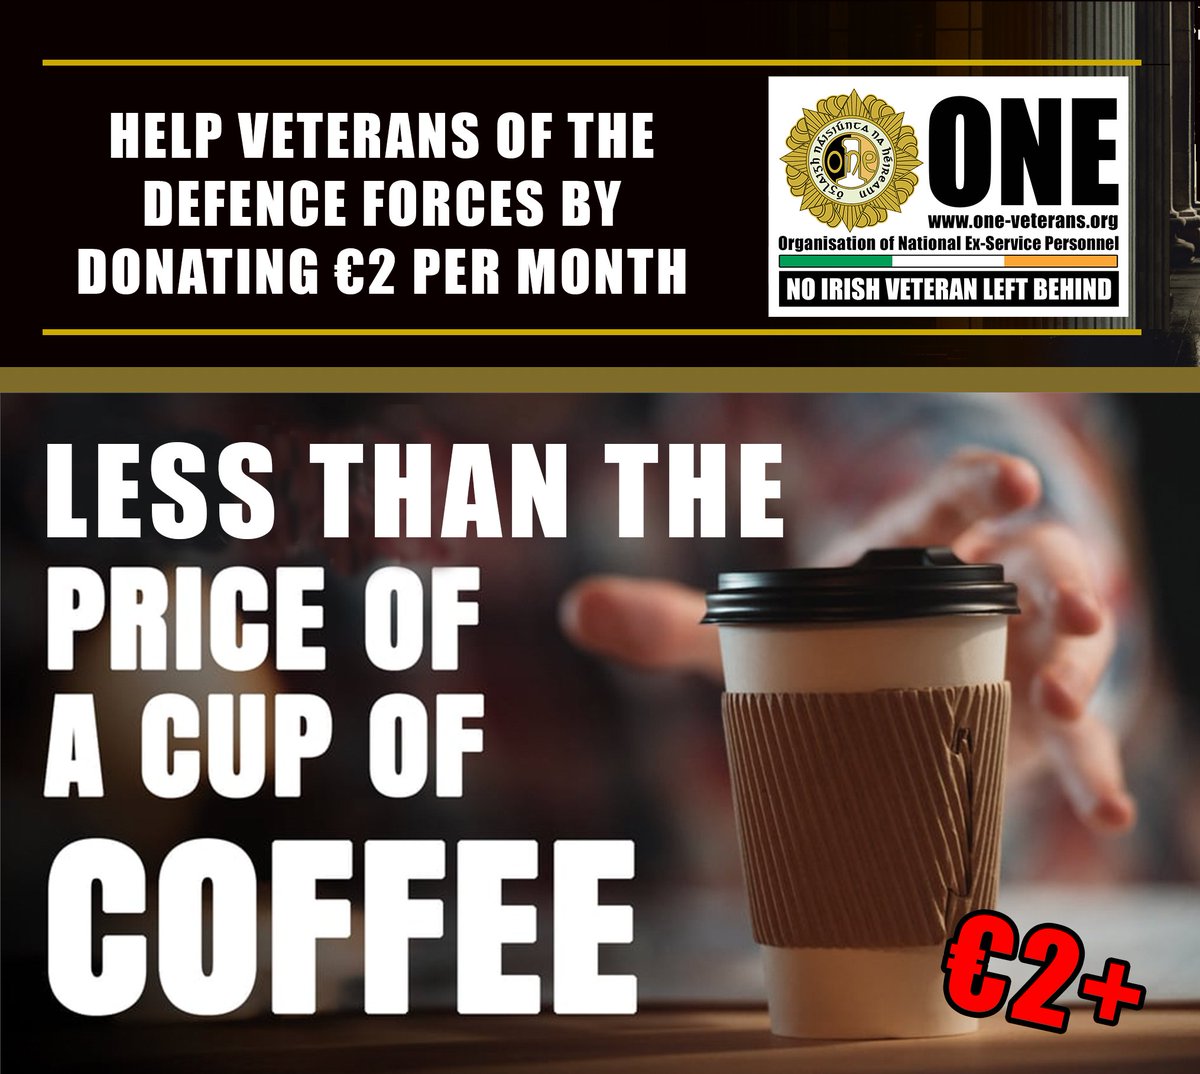 Help #Homeless #DefenceForces #Veterans by donating €2 per month ONE provides 18,615 bed nights a year, homes in Dublin, Letterkenny, Athlone & Cobh. Set up regular donations (monthly/quarterly/yearly) online: one-veterans.org/donate/ More info here: one-veterans.org/help-veterans-…